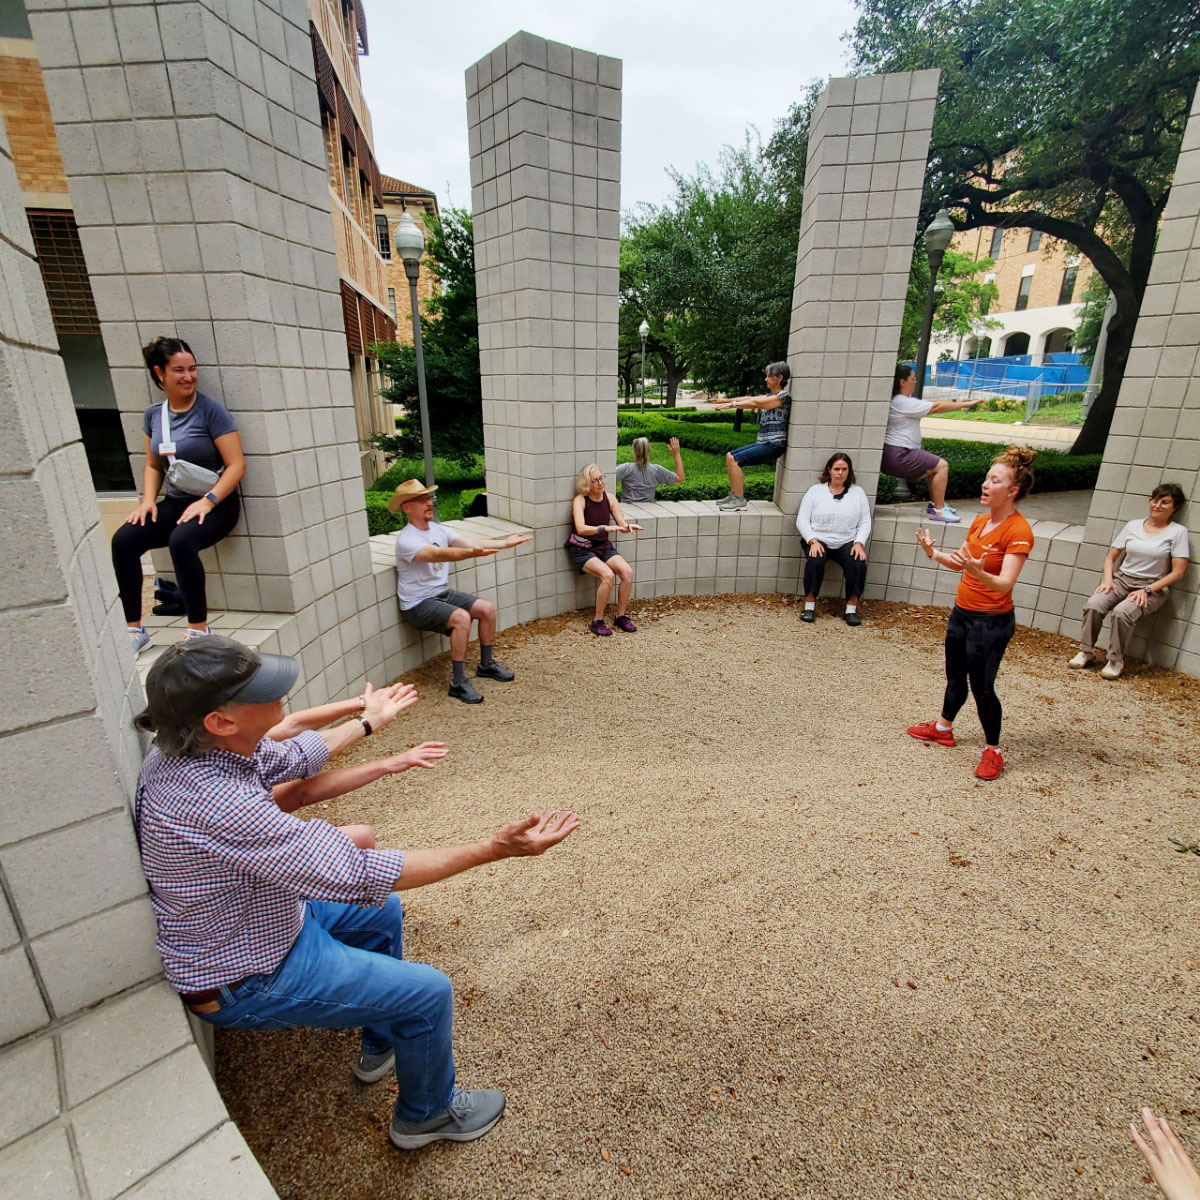 A group of people do wall sits in Sol LeWitt's 